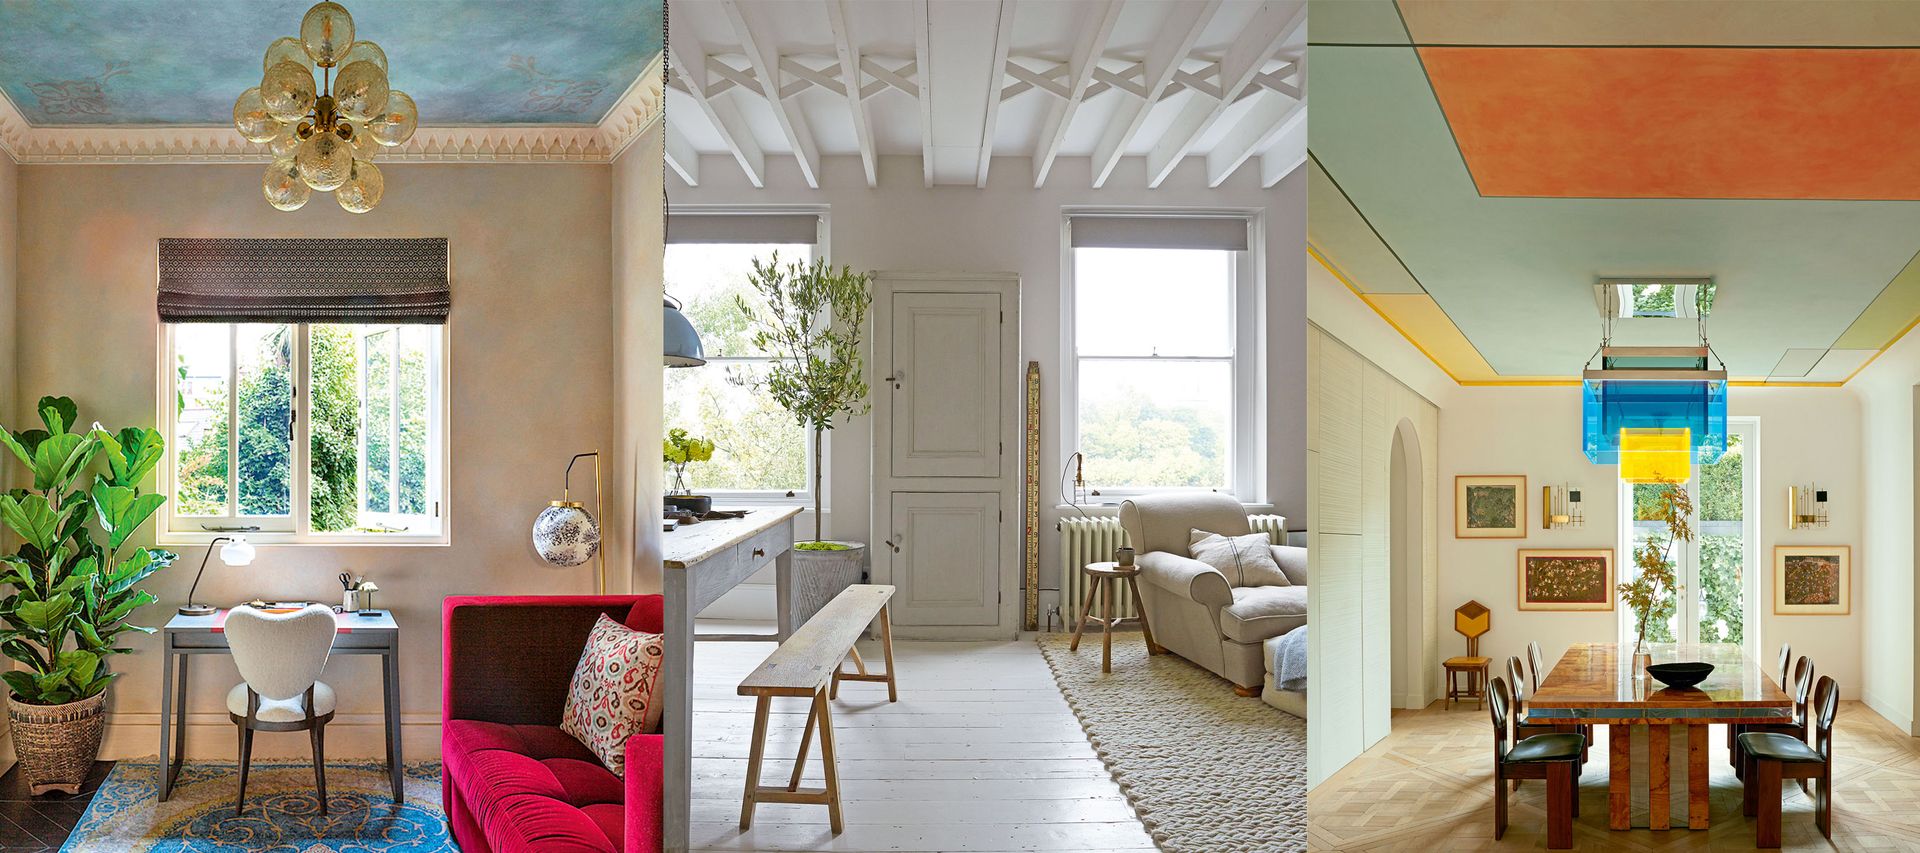 Ceiling ideas: 13 ways to add interest to the fifth wall